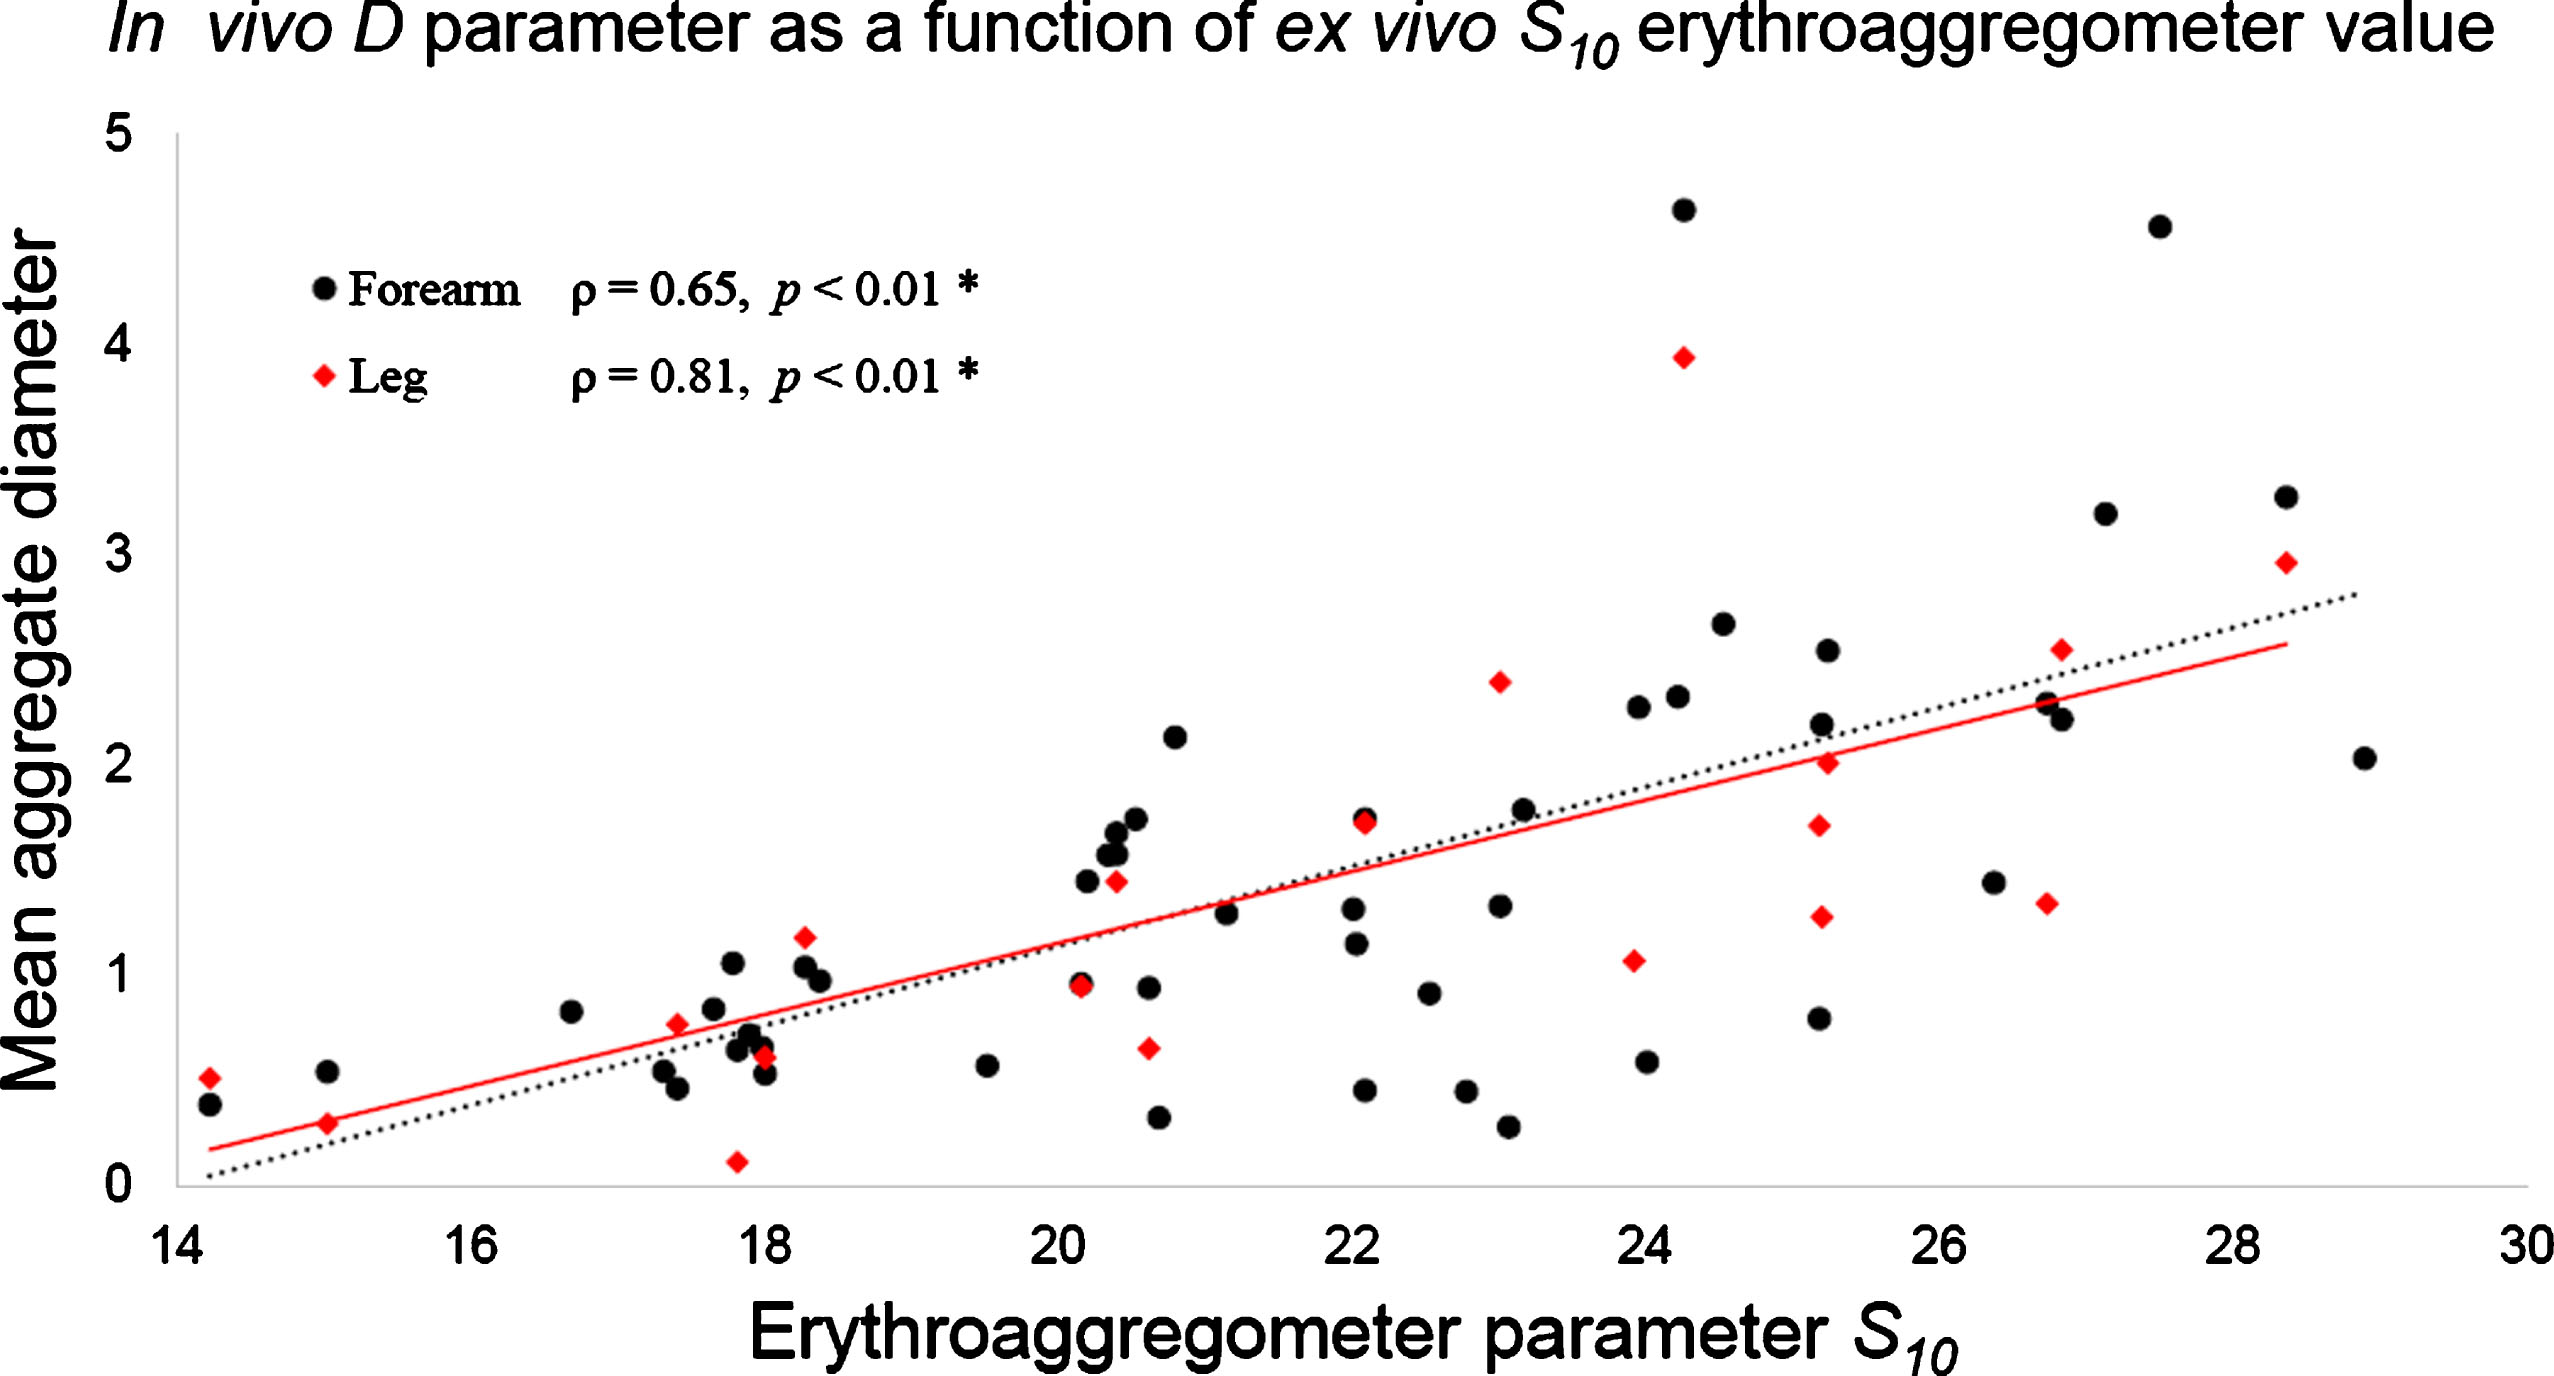 SFSAE D parameter on both forearm and leg at low shear rates versus the ex vivo erythroaggregometer parameter S10. D values increased proportionally with S10, as shown by the linear fitting curve.